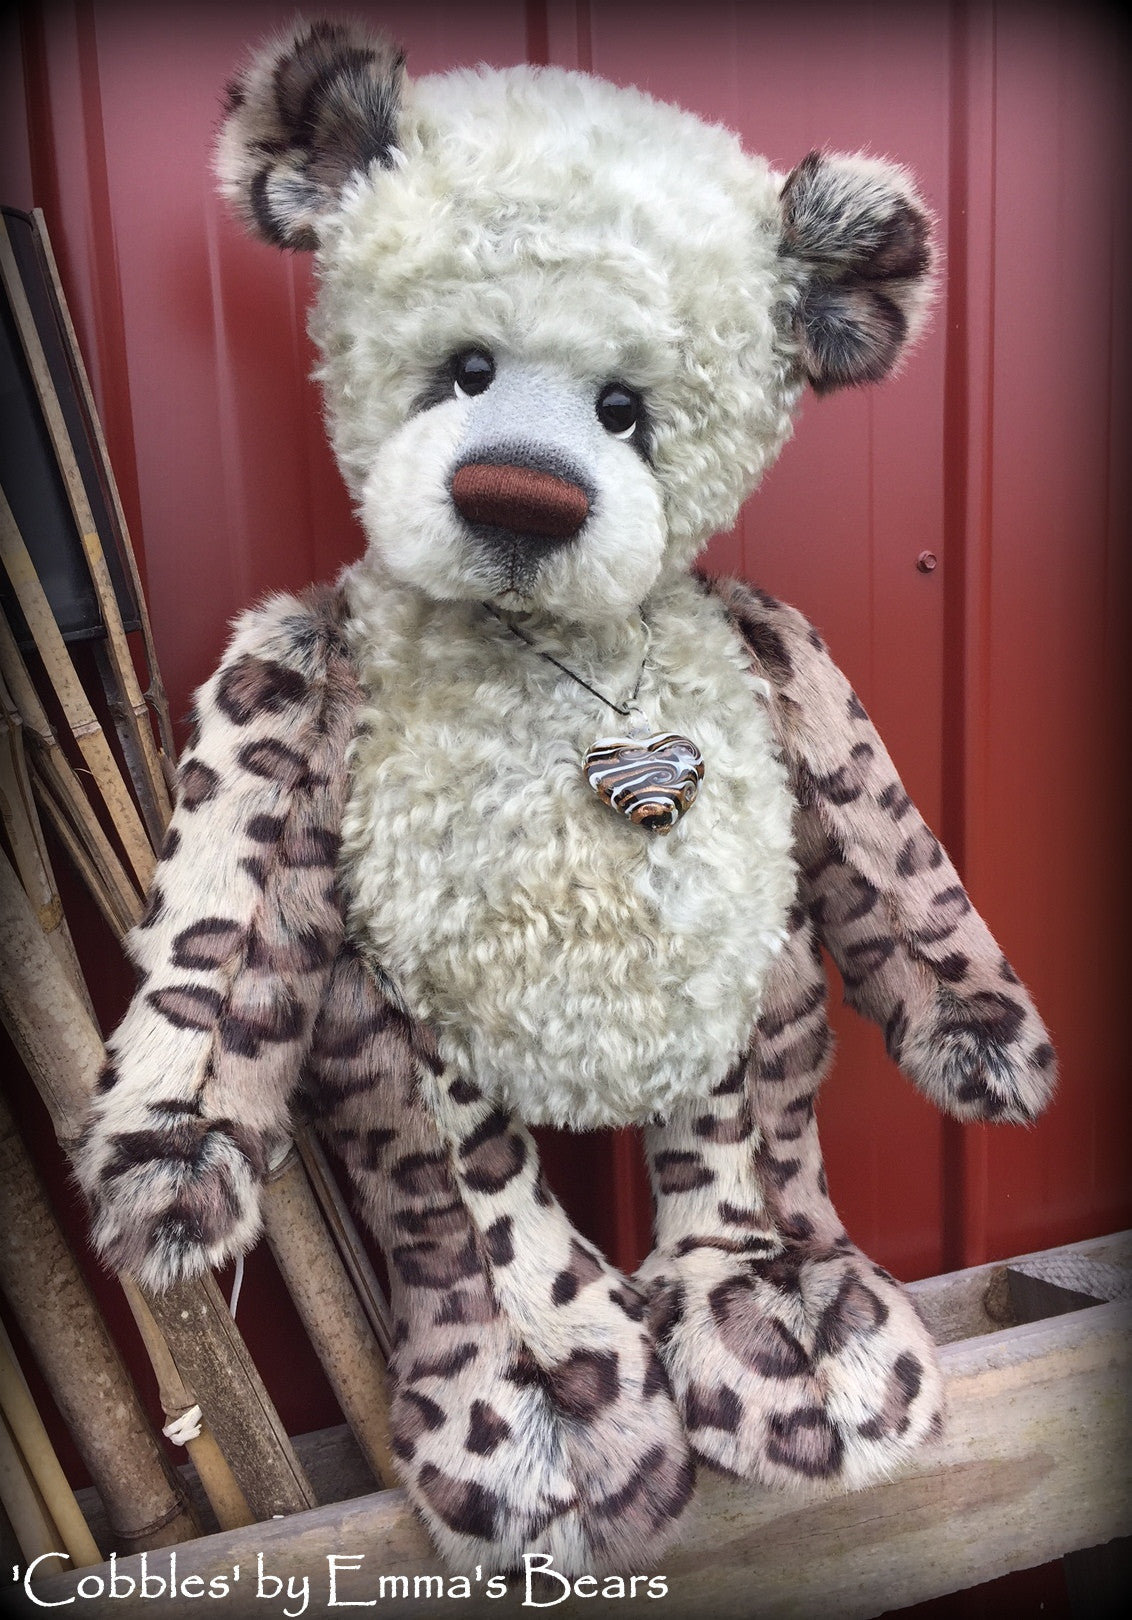 Cobbles - 22IN hand dyed mohair and faux fur bear by Emmas Bears - OOAK